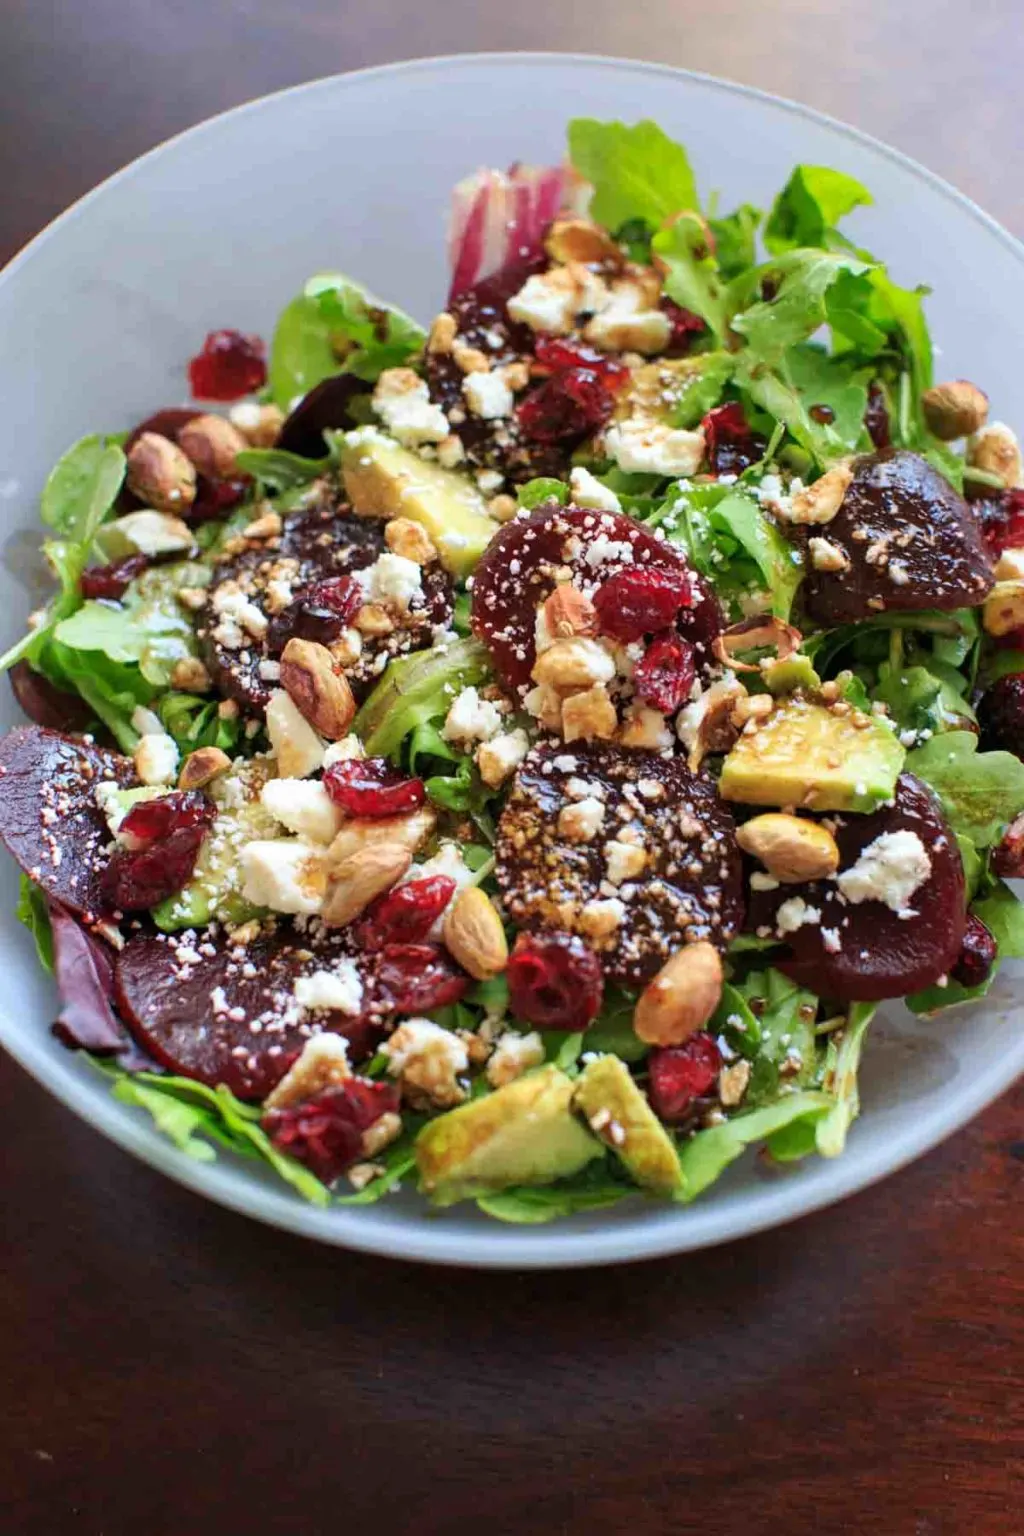 Roasted Beet Salad with Honey Balsamic Vinaigrette. A flavorful and healthy salad